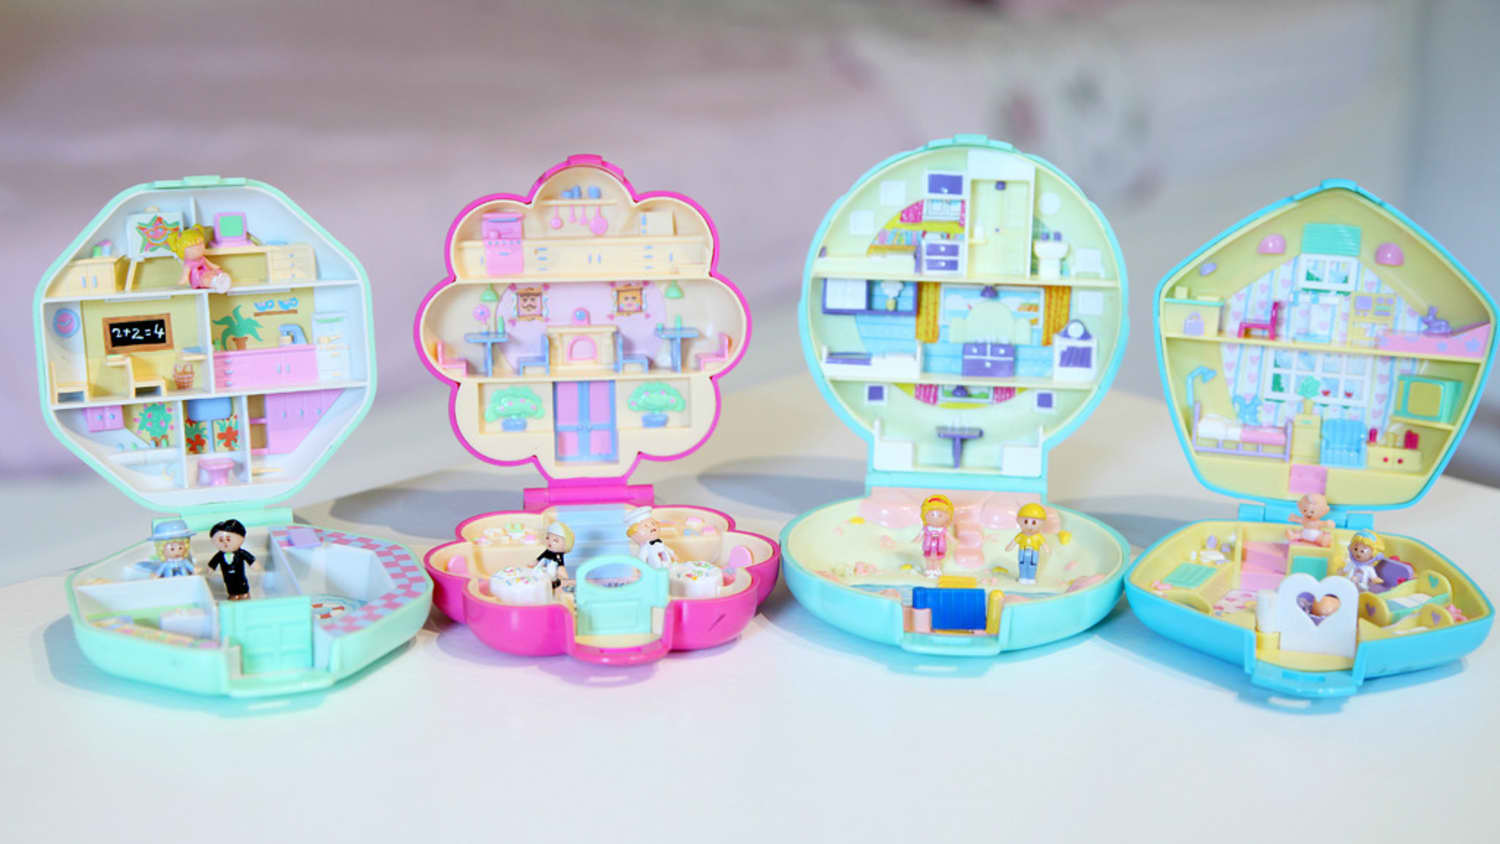 7 of the Most Valuable Polly Pocket Toys From the '90s and Beyond